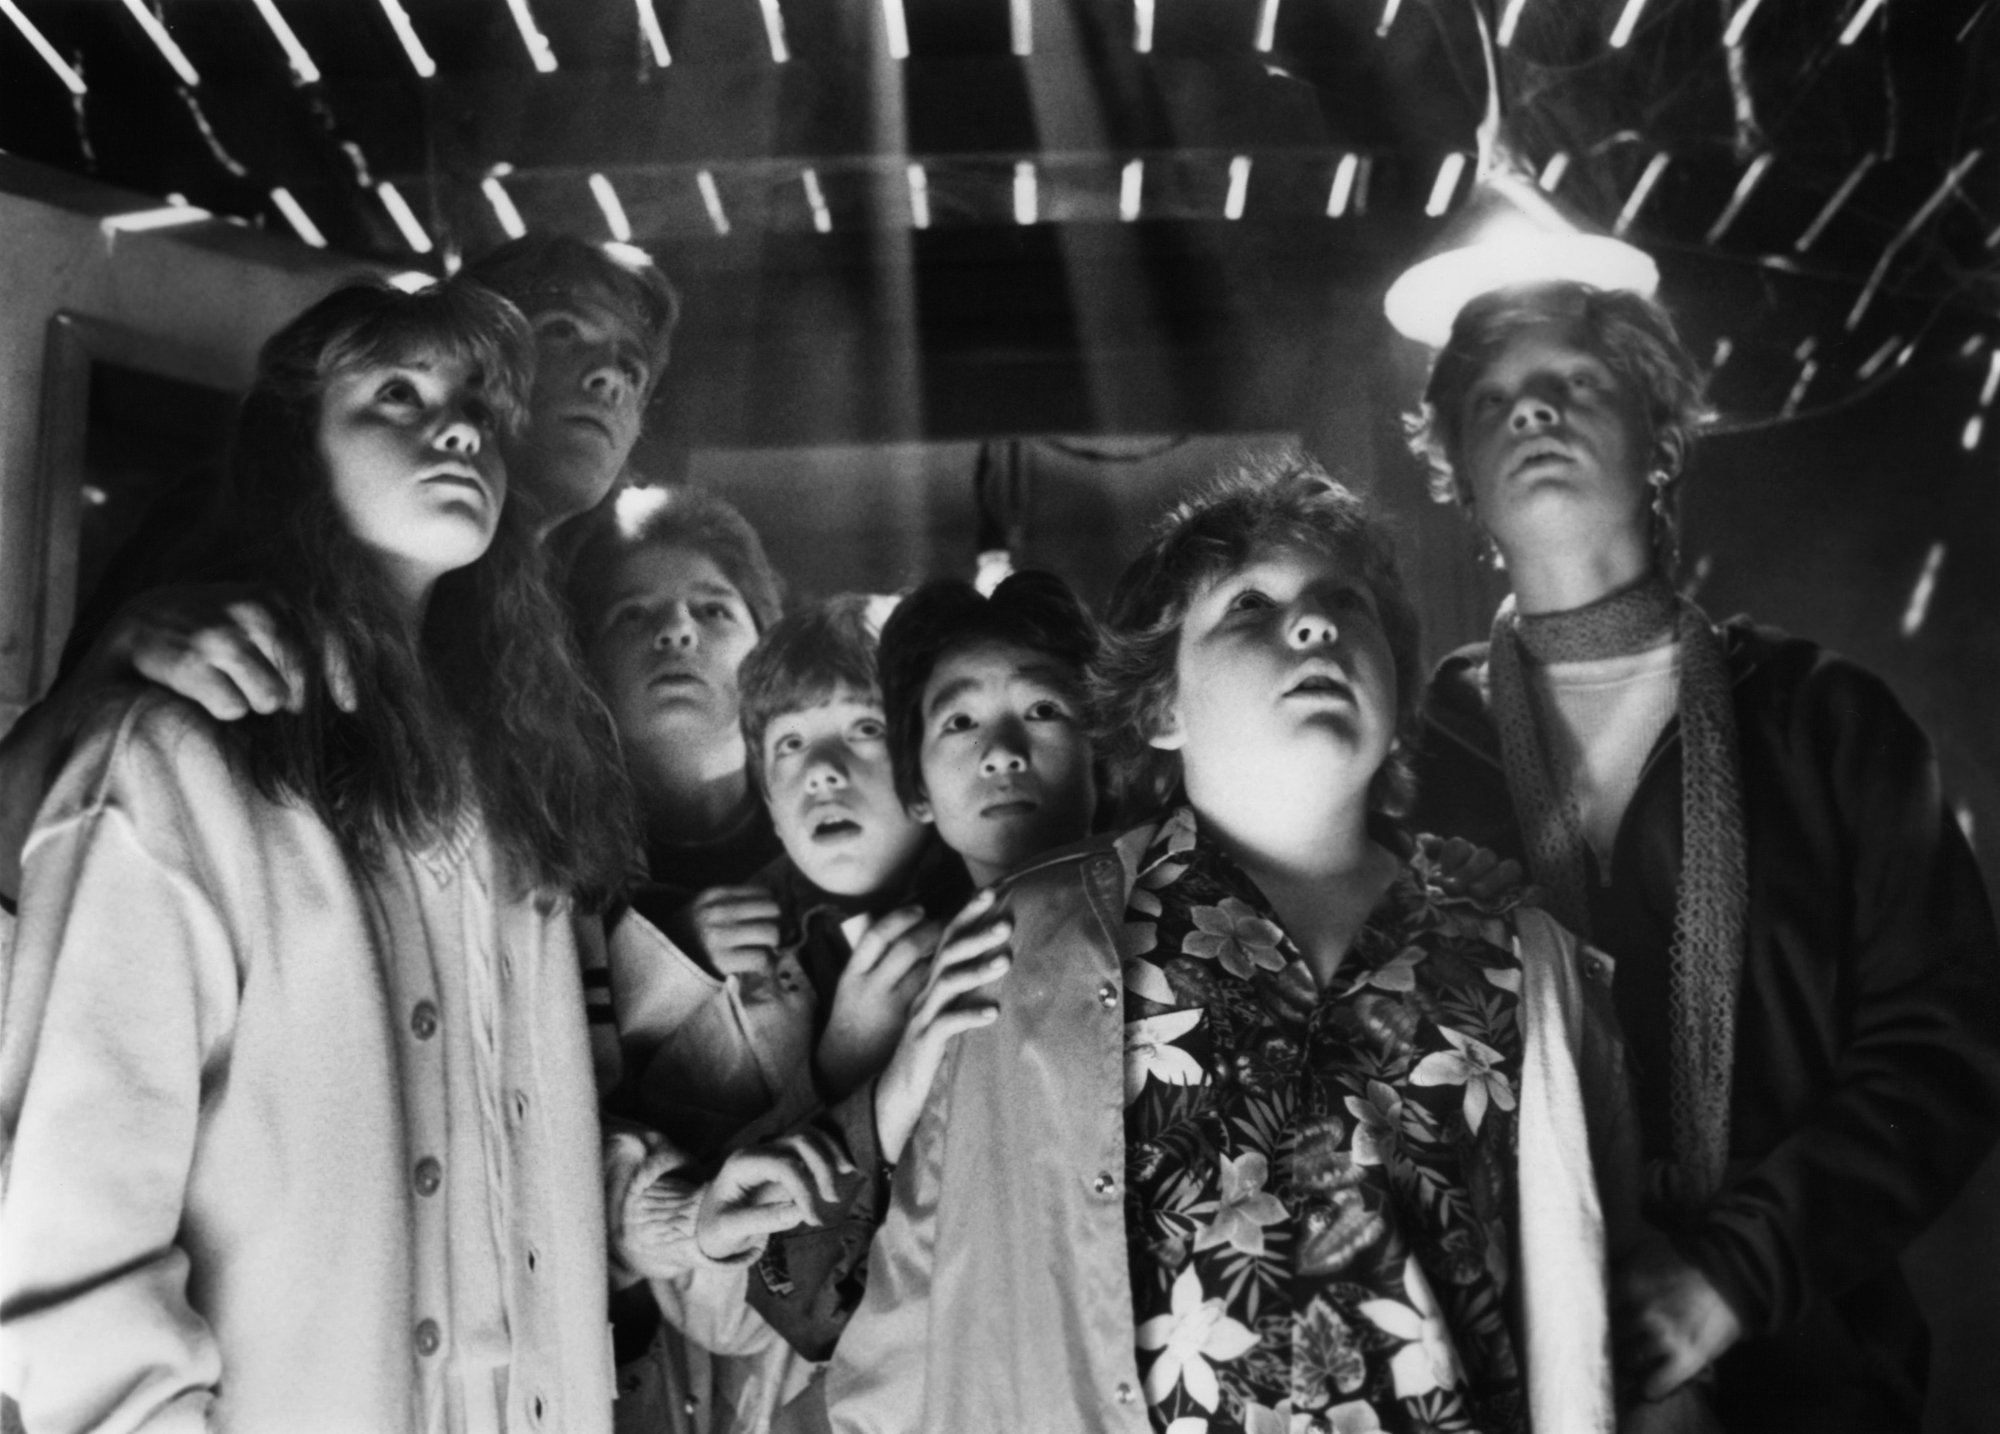 'The Goonies' cast members looking up, nervous, in black and white